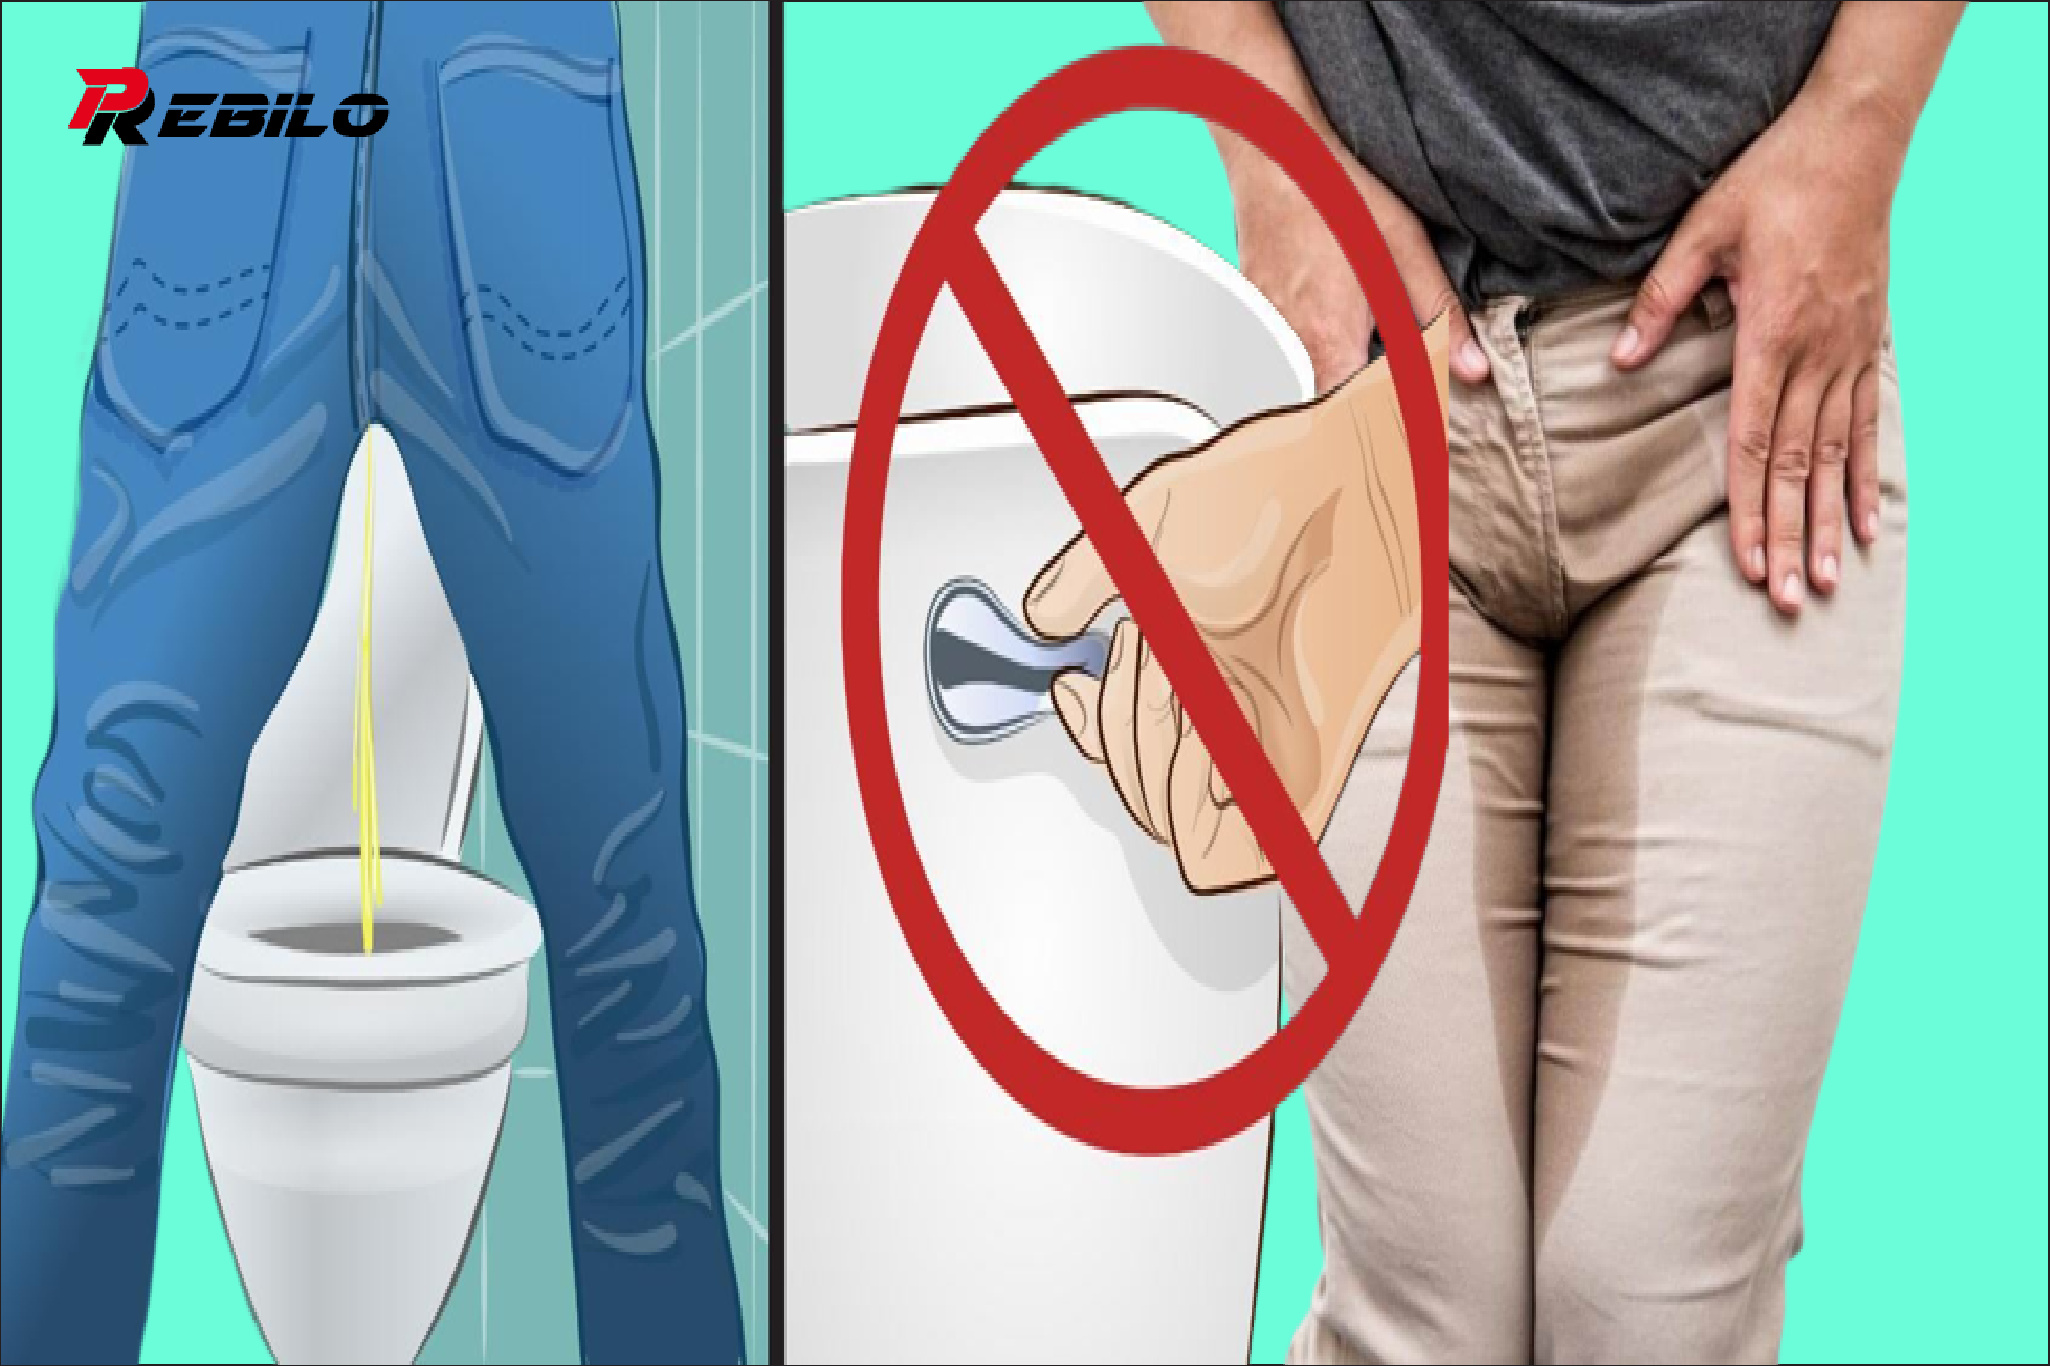 Reasons that prompt you to clean the toilet after urinating that you may not know